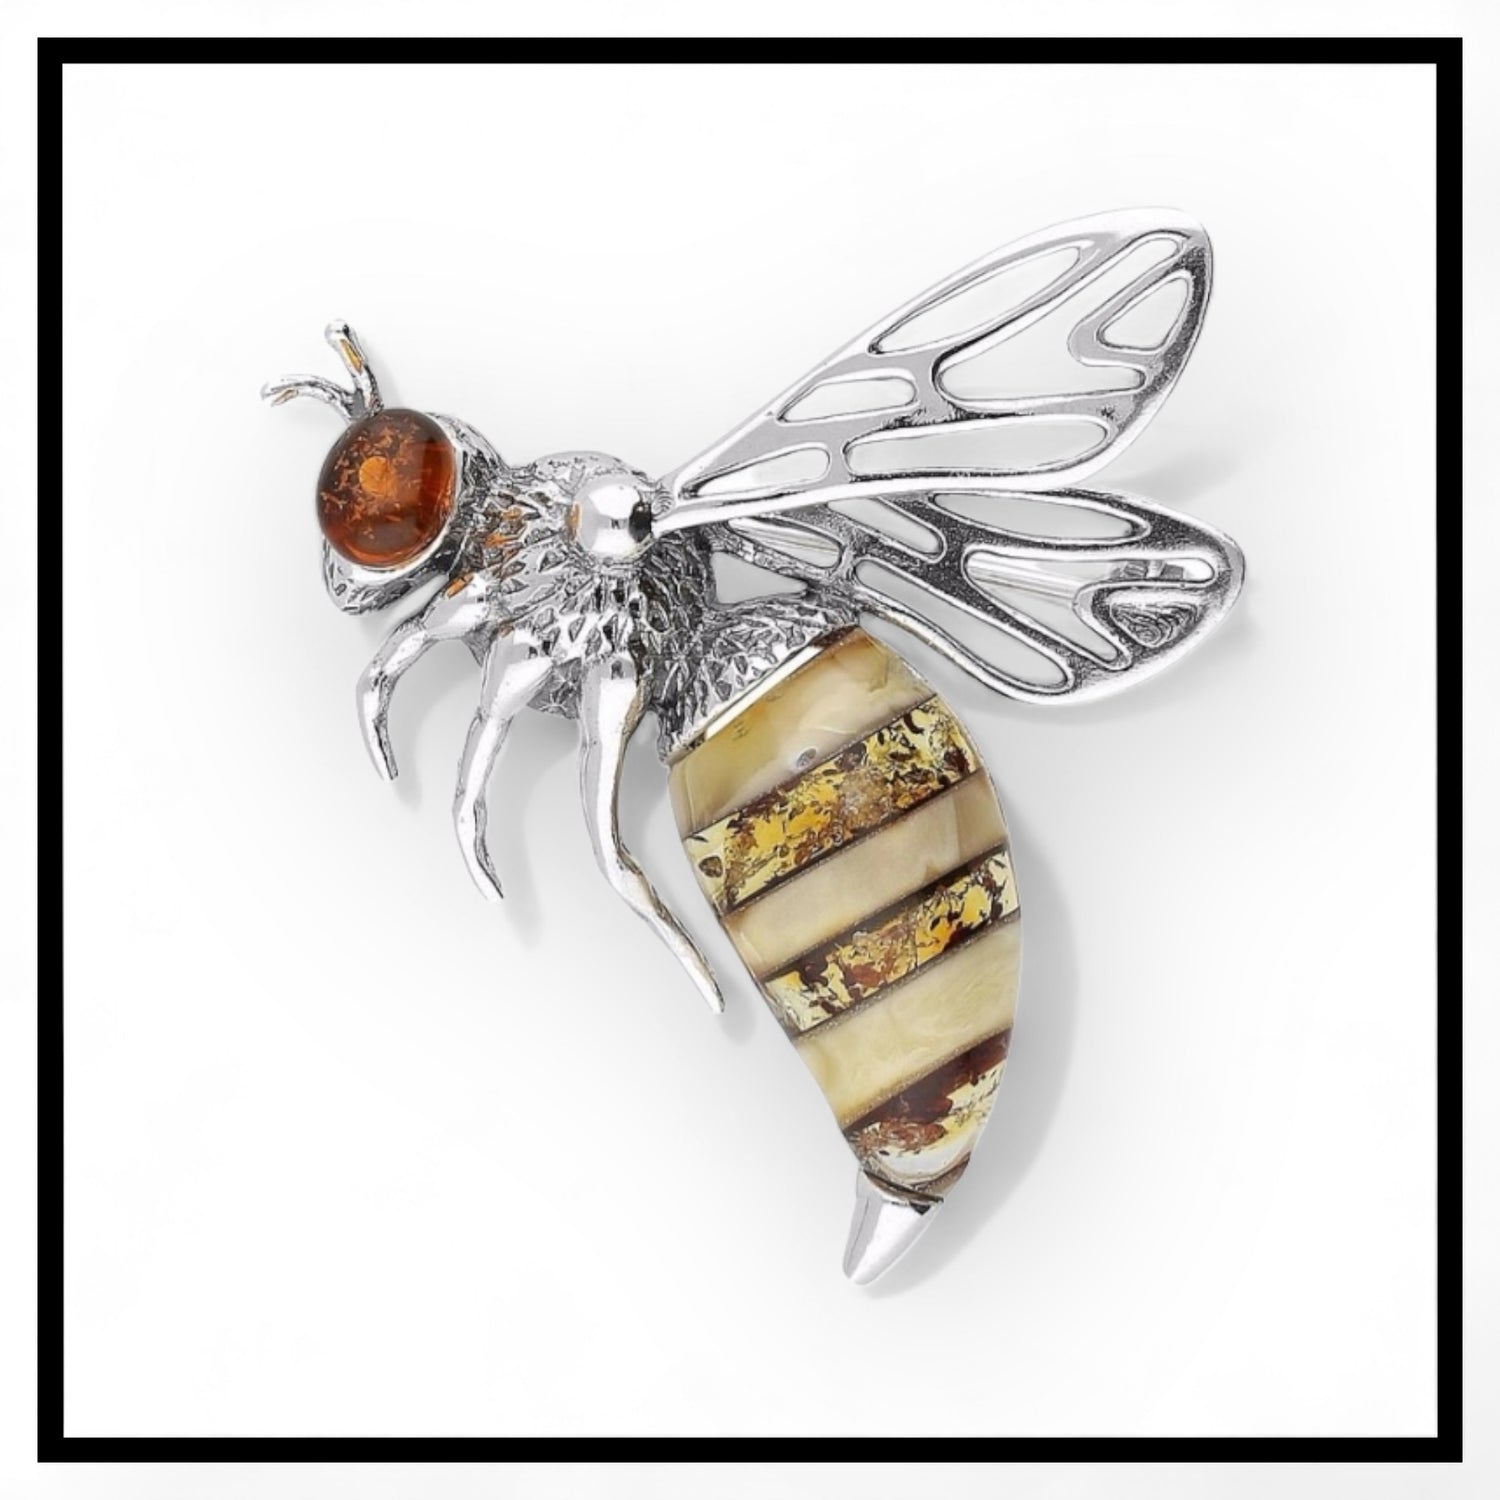 Baltic Amber Collection & 925 sterling silver jewellery collections at Twelve Silver Trees Jewellery & Gifts